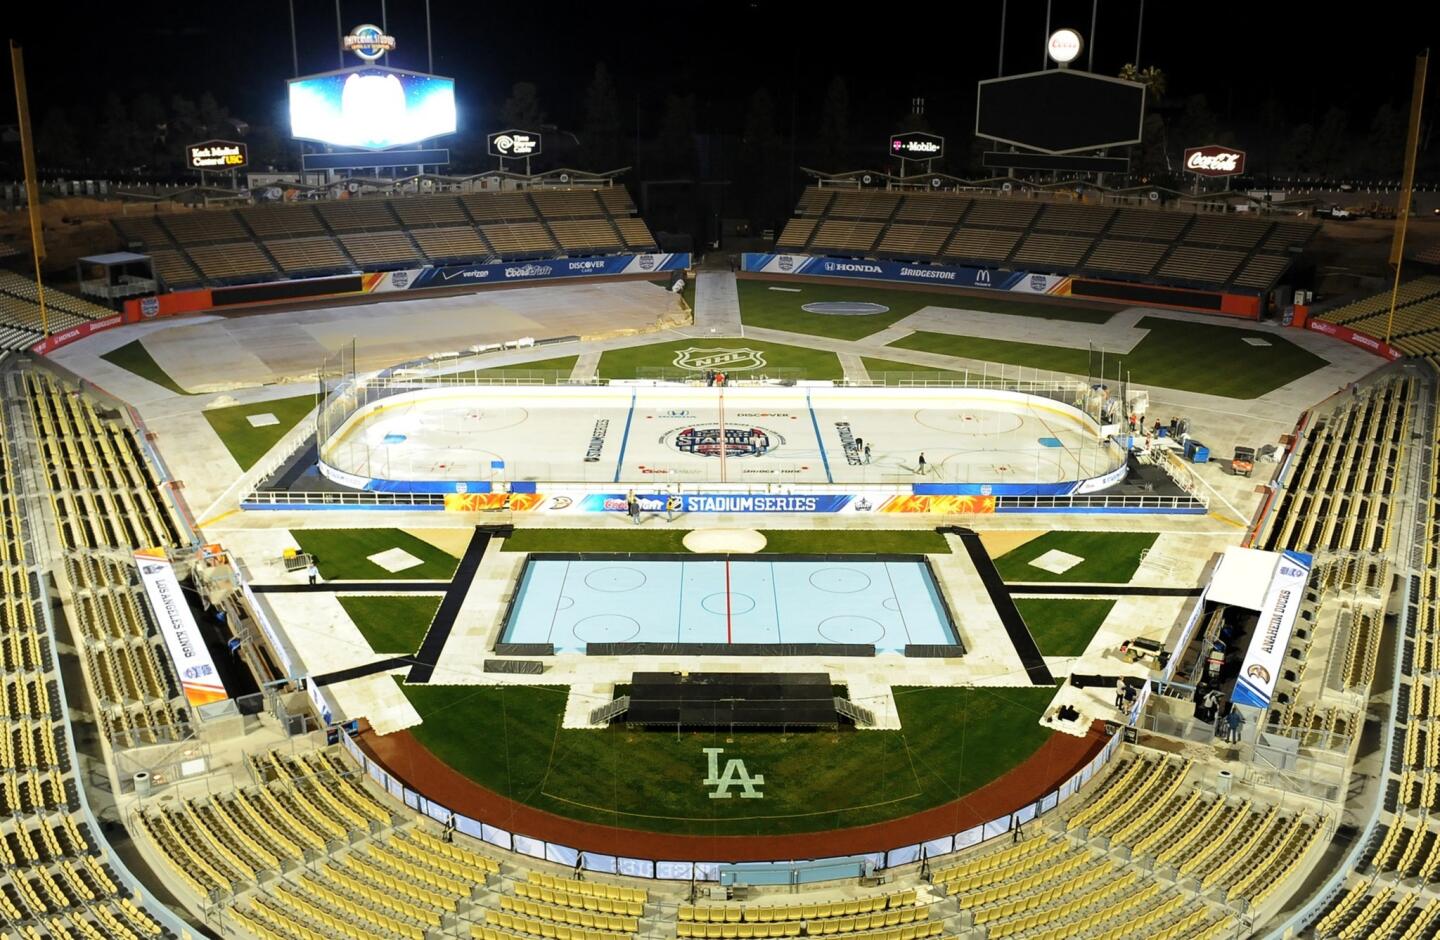 A view of the Dodger Stadium ice rink which will be the site of Saturday night's Kings-Ducks game.